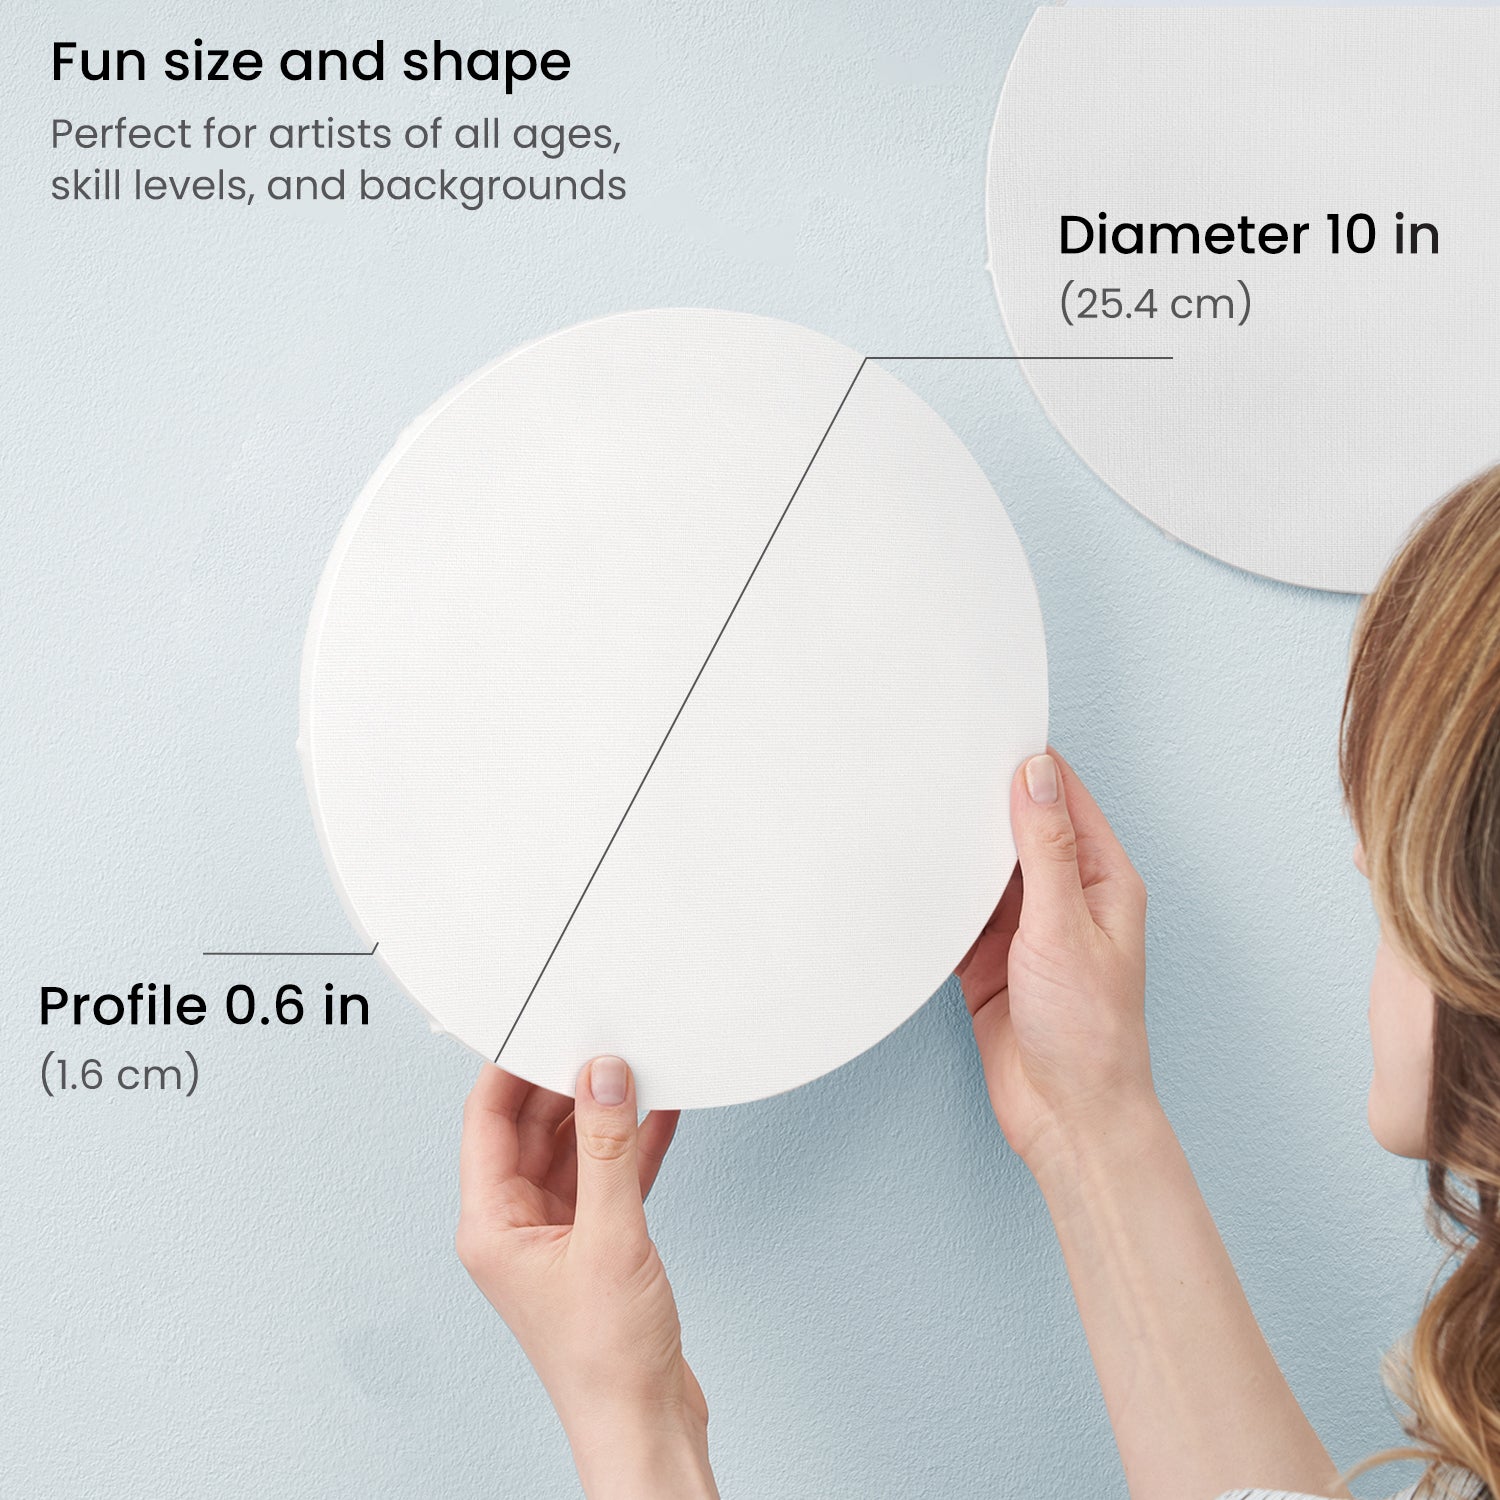 White Round Shape Canvas Board, Size: 4 - 20 at Rs 100/piece in Malkapur  Buldana District